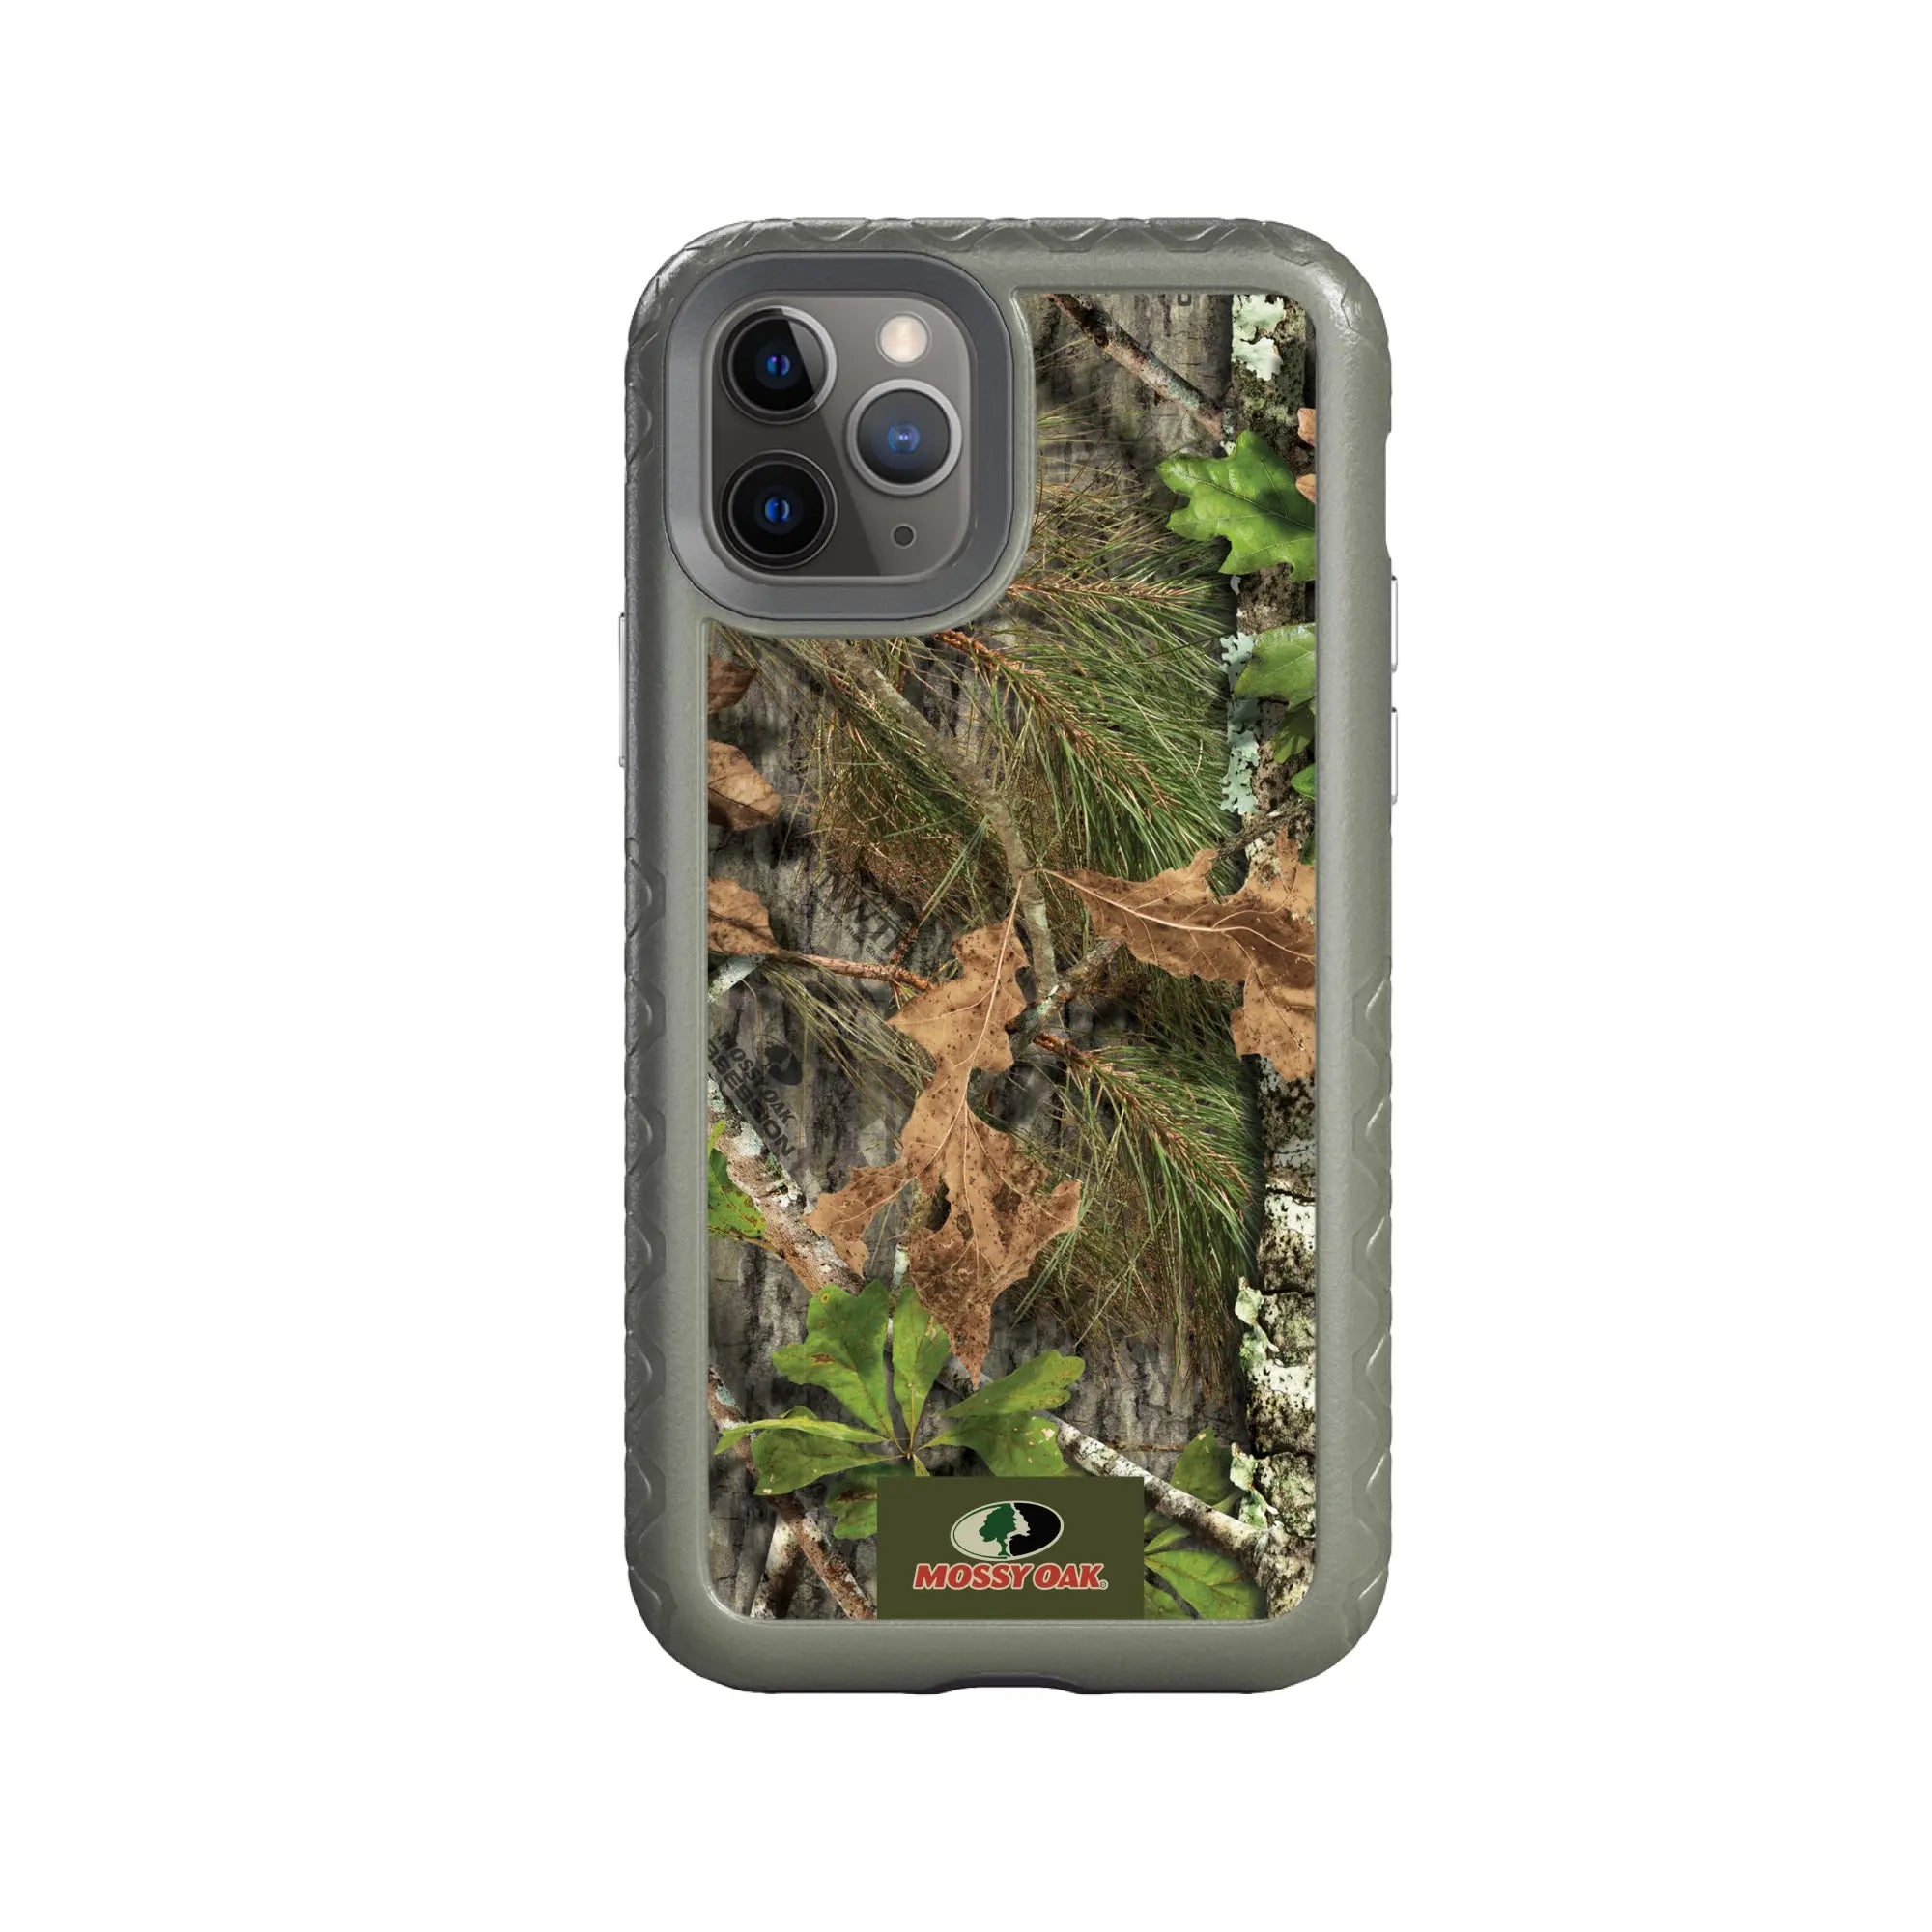 Mossy Oak | MagSafe Dual Layer Case for Apple iPhone 11 Pro | Obsession | Fortitude Series - Custom Case - OliveDrabGreen - cellhelmet